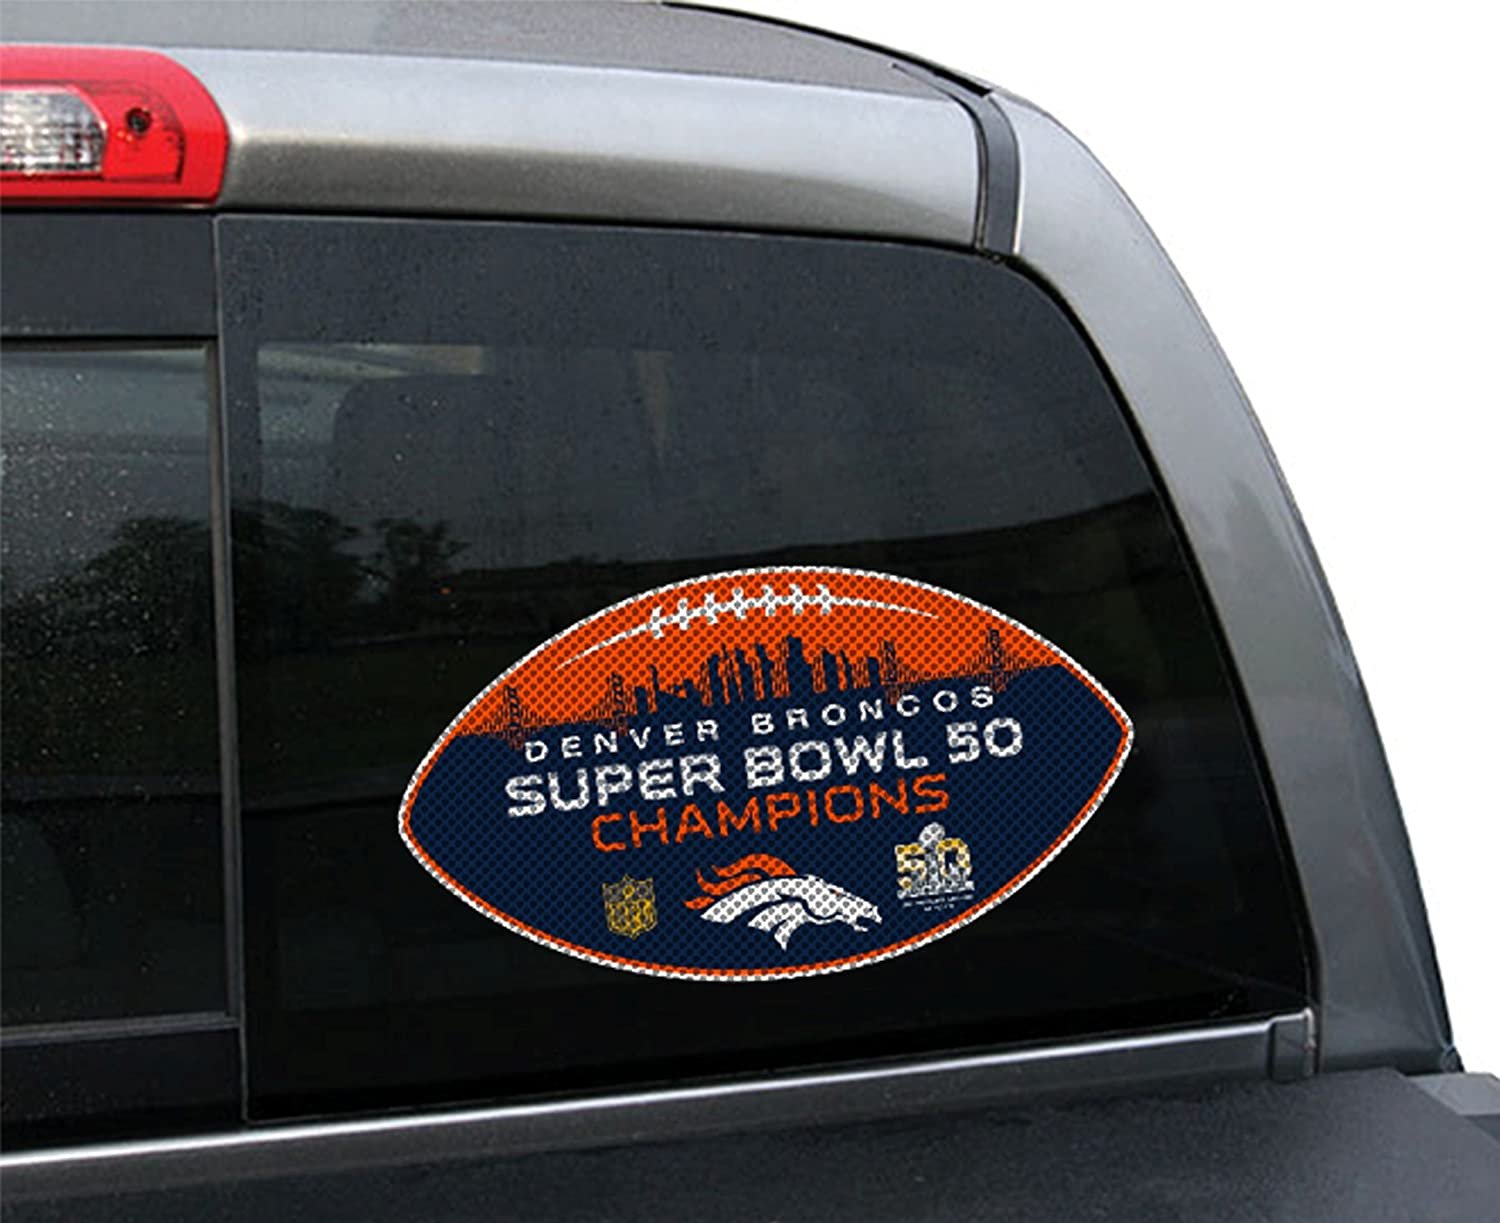 Denver Broncos Super Bowl 50 Champions 12 Inch Preforated Window Film Decal Sticker, One-Way Vision, Adhesive Backing